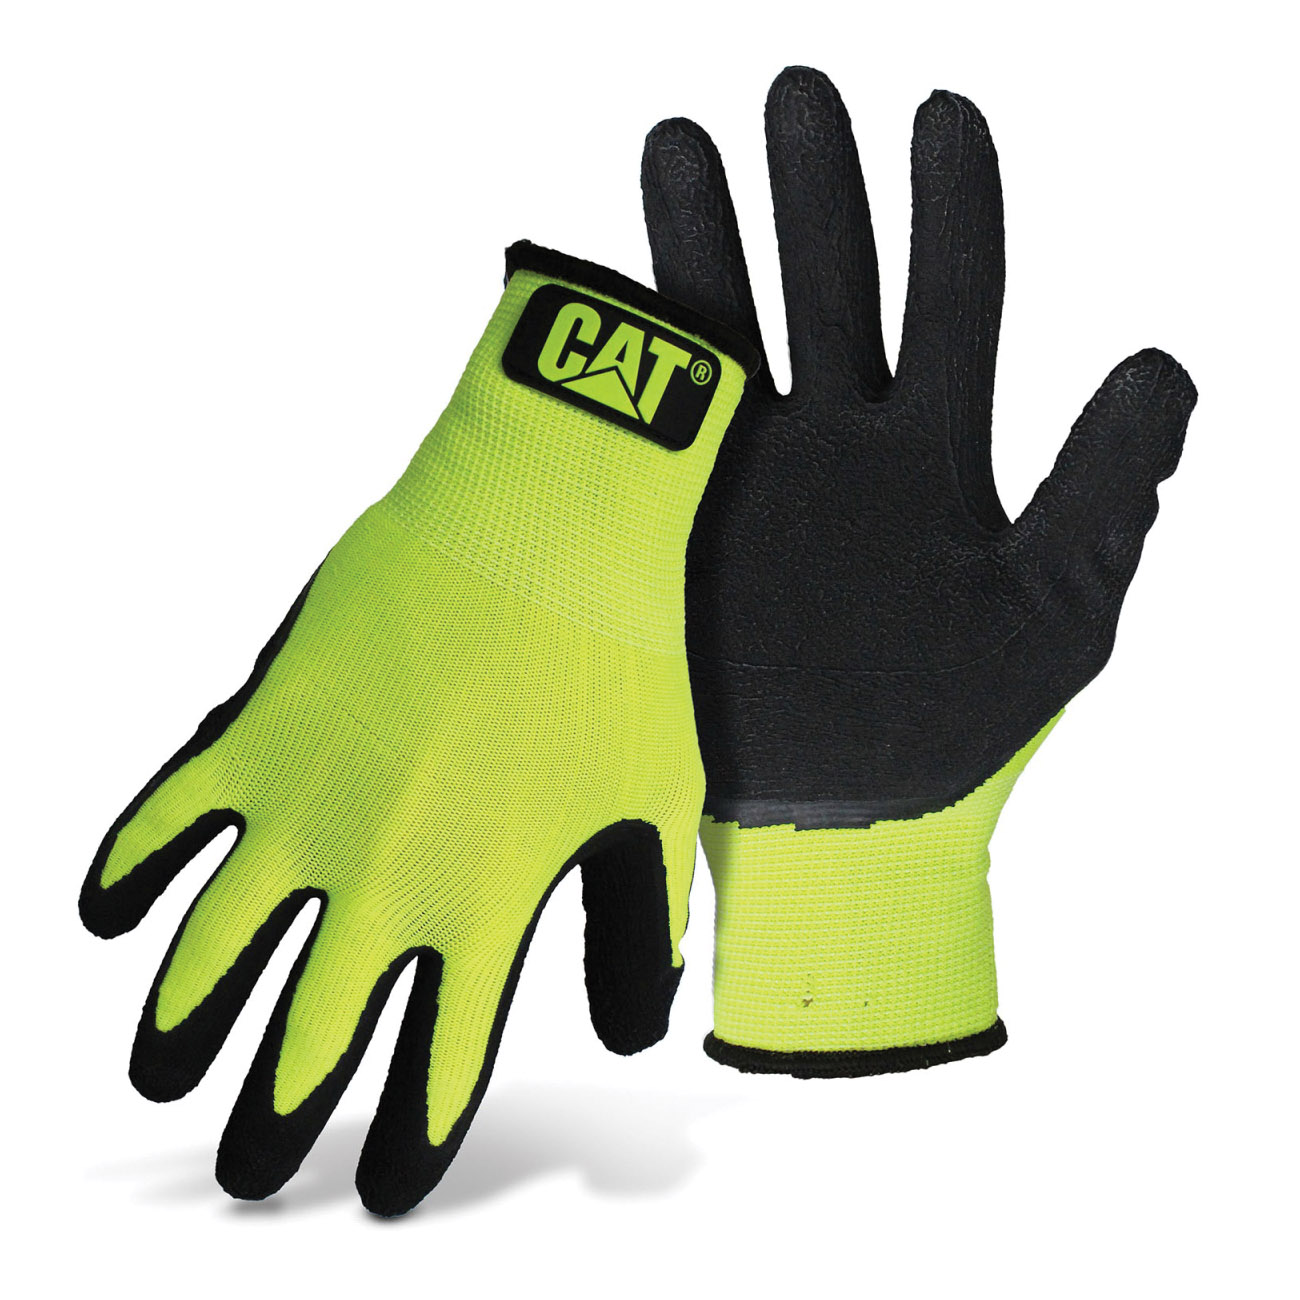 CAT017418L High-Visibility Coated Gloves, L, Knit Wrist Cuff, Latex Coating, Polyester Glove, Green